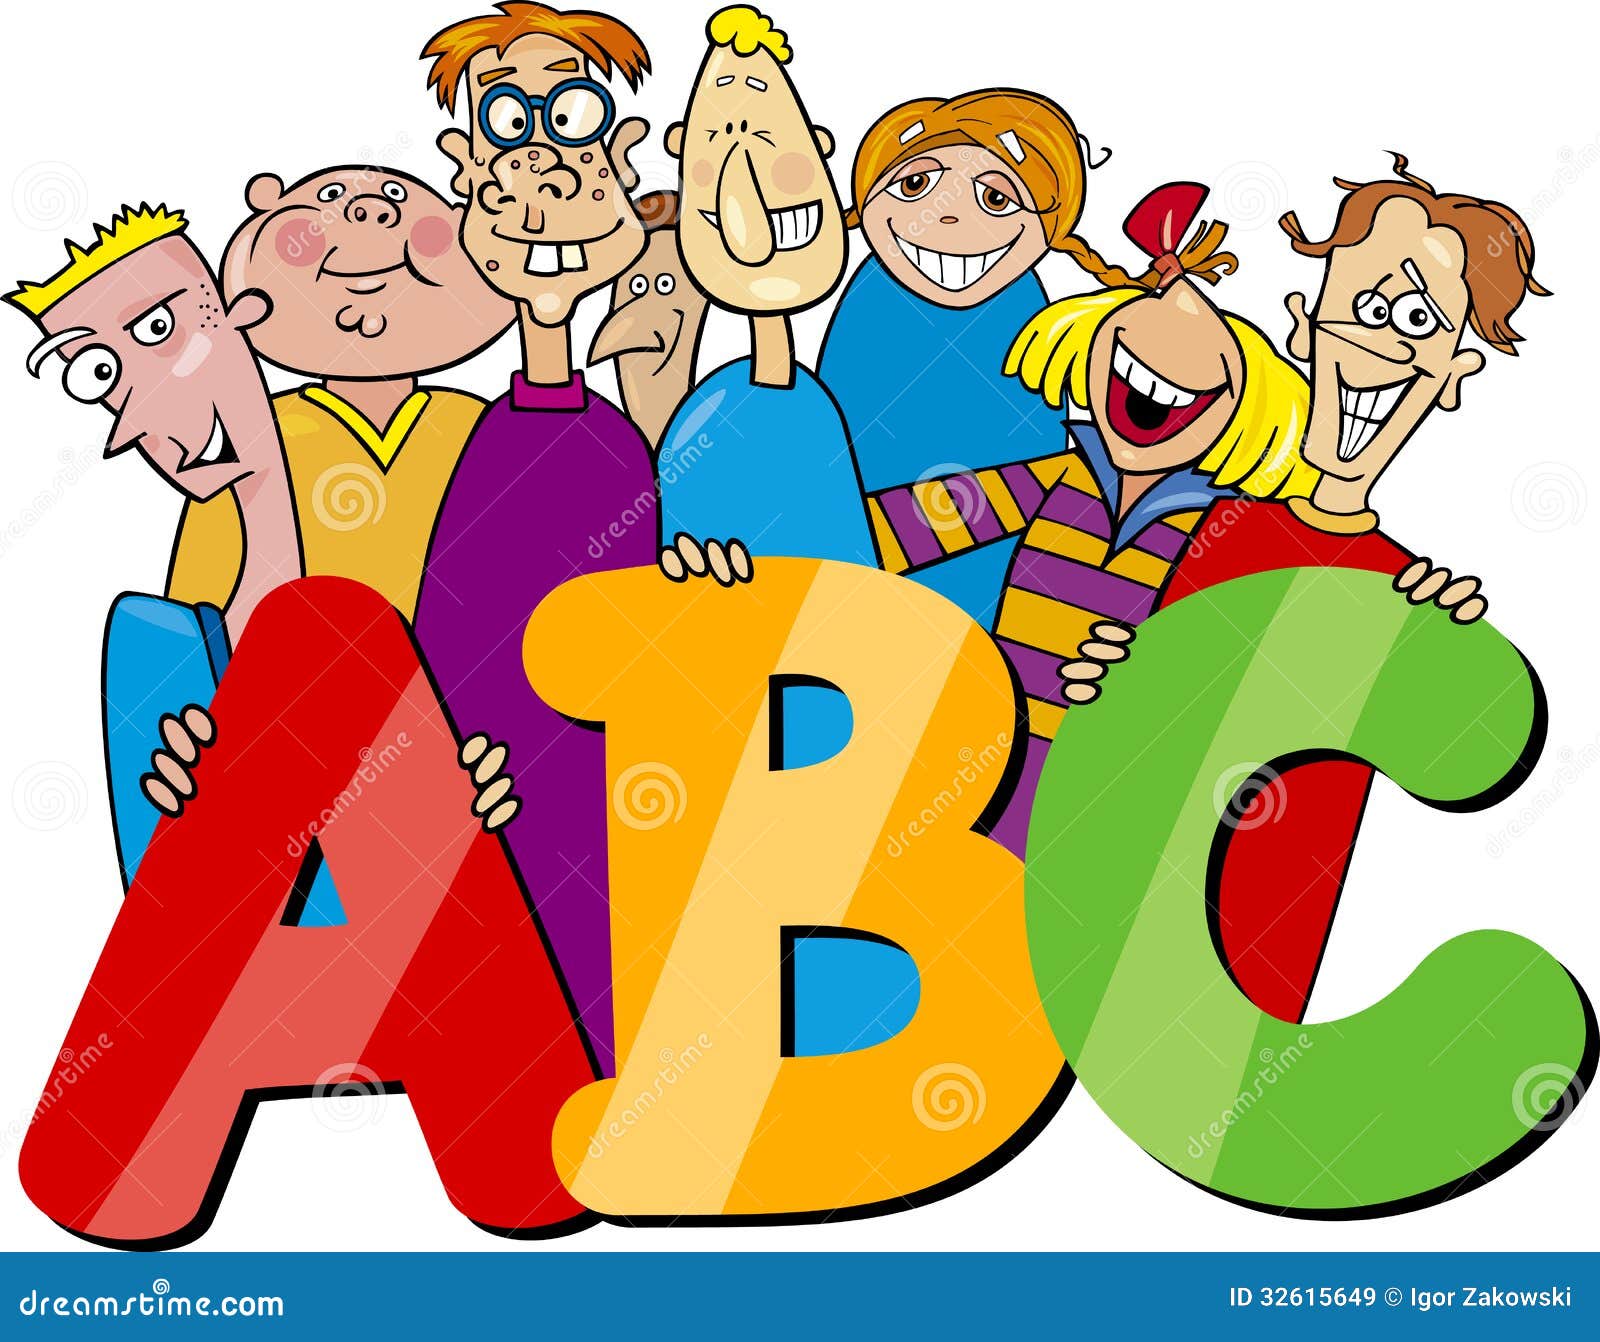 Kids With Abc Letters Cartoon Royalty Free Stock Images ...